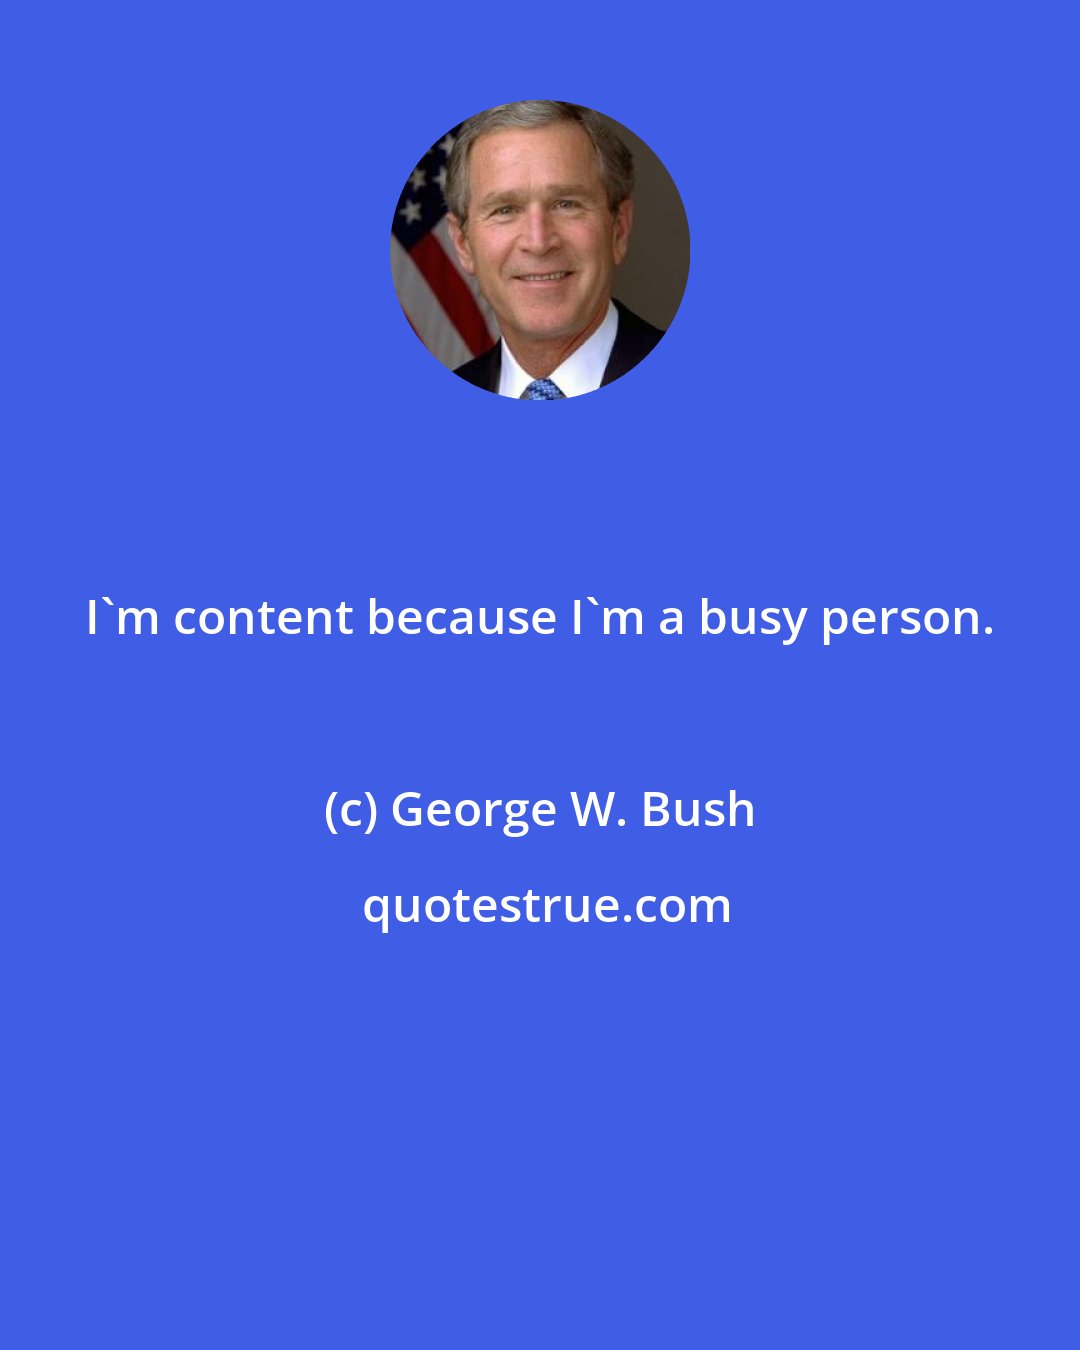 George W. Bush: I'm content because I'm a busy person.